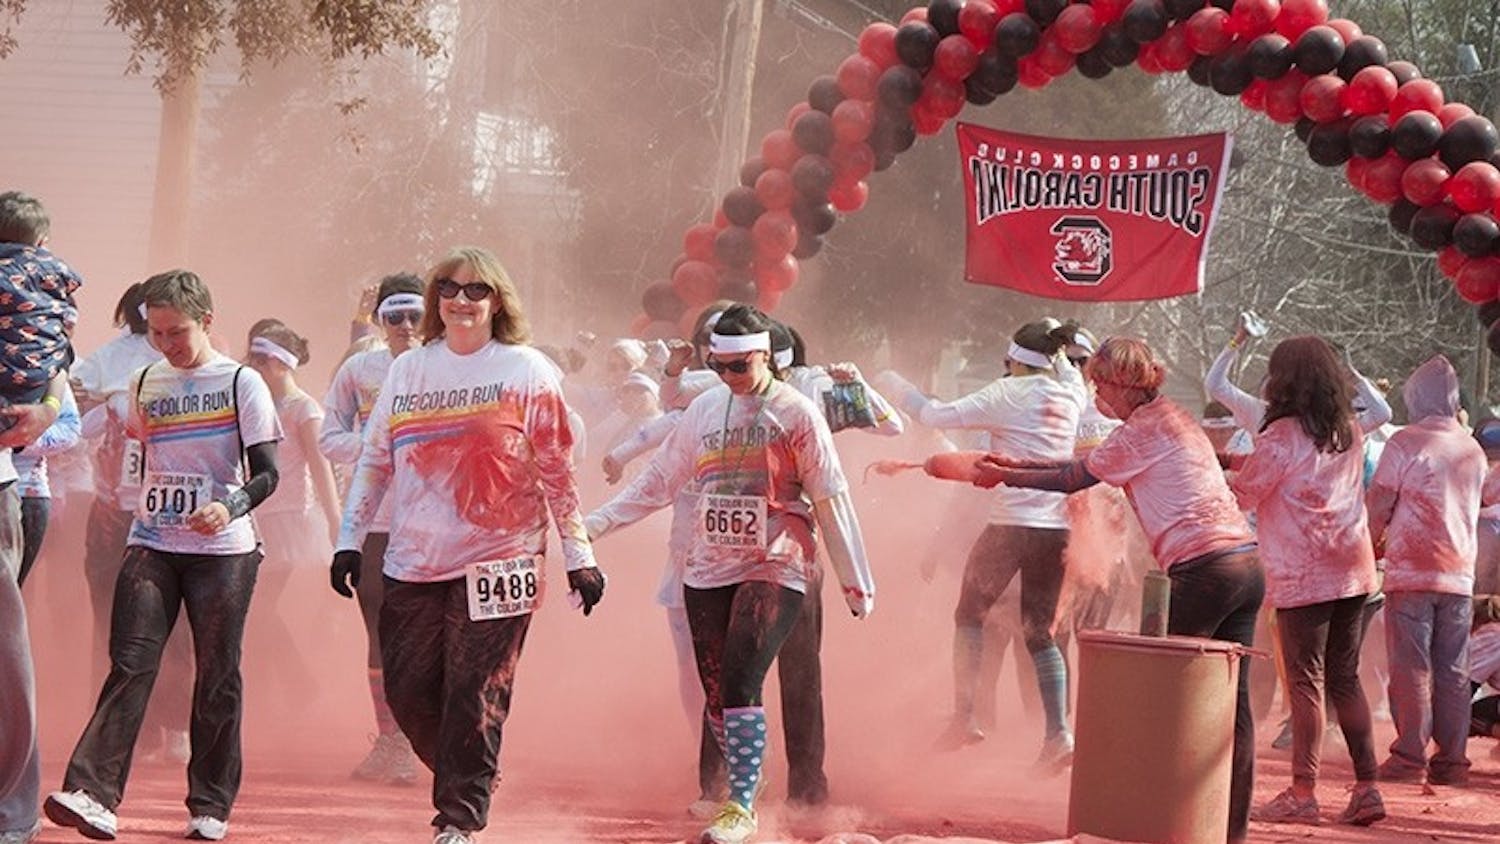 More than a thousand runners and walkers are covered in garnet powder Saturday morning.